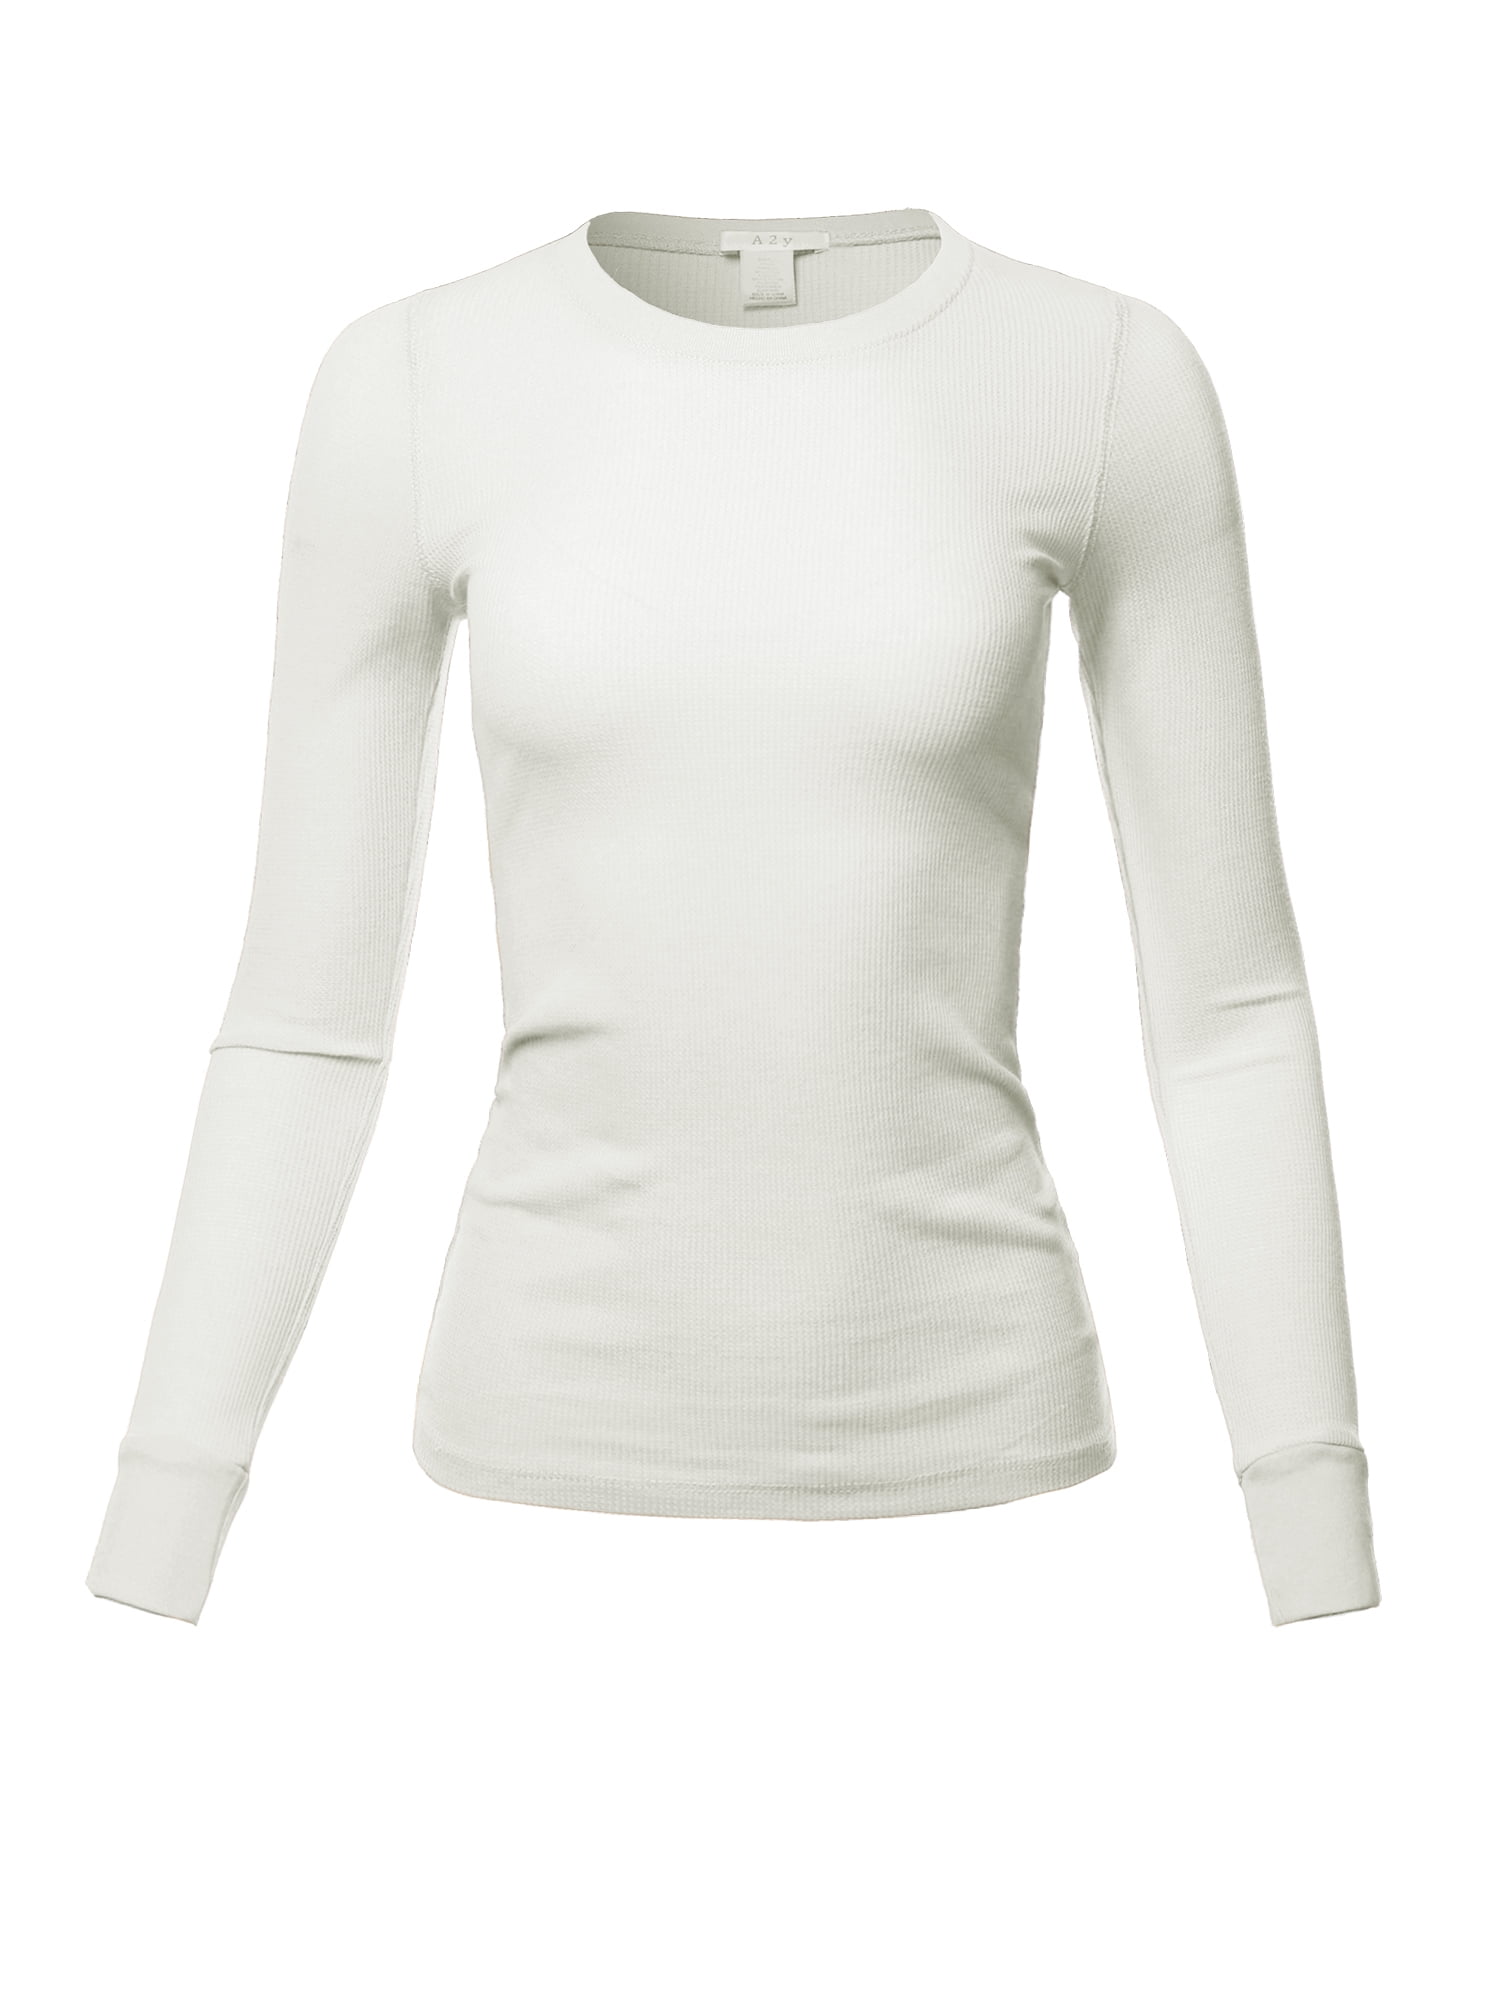 A2y A2y Womens Basic Solid Fitted Long Sleeve Crew Neck Thermal Top Shirt White L Walmart 6661